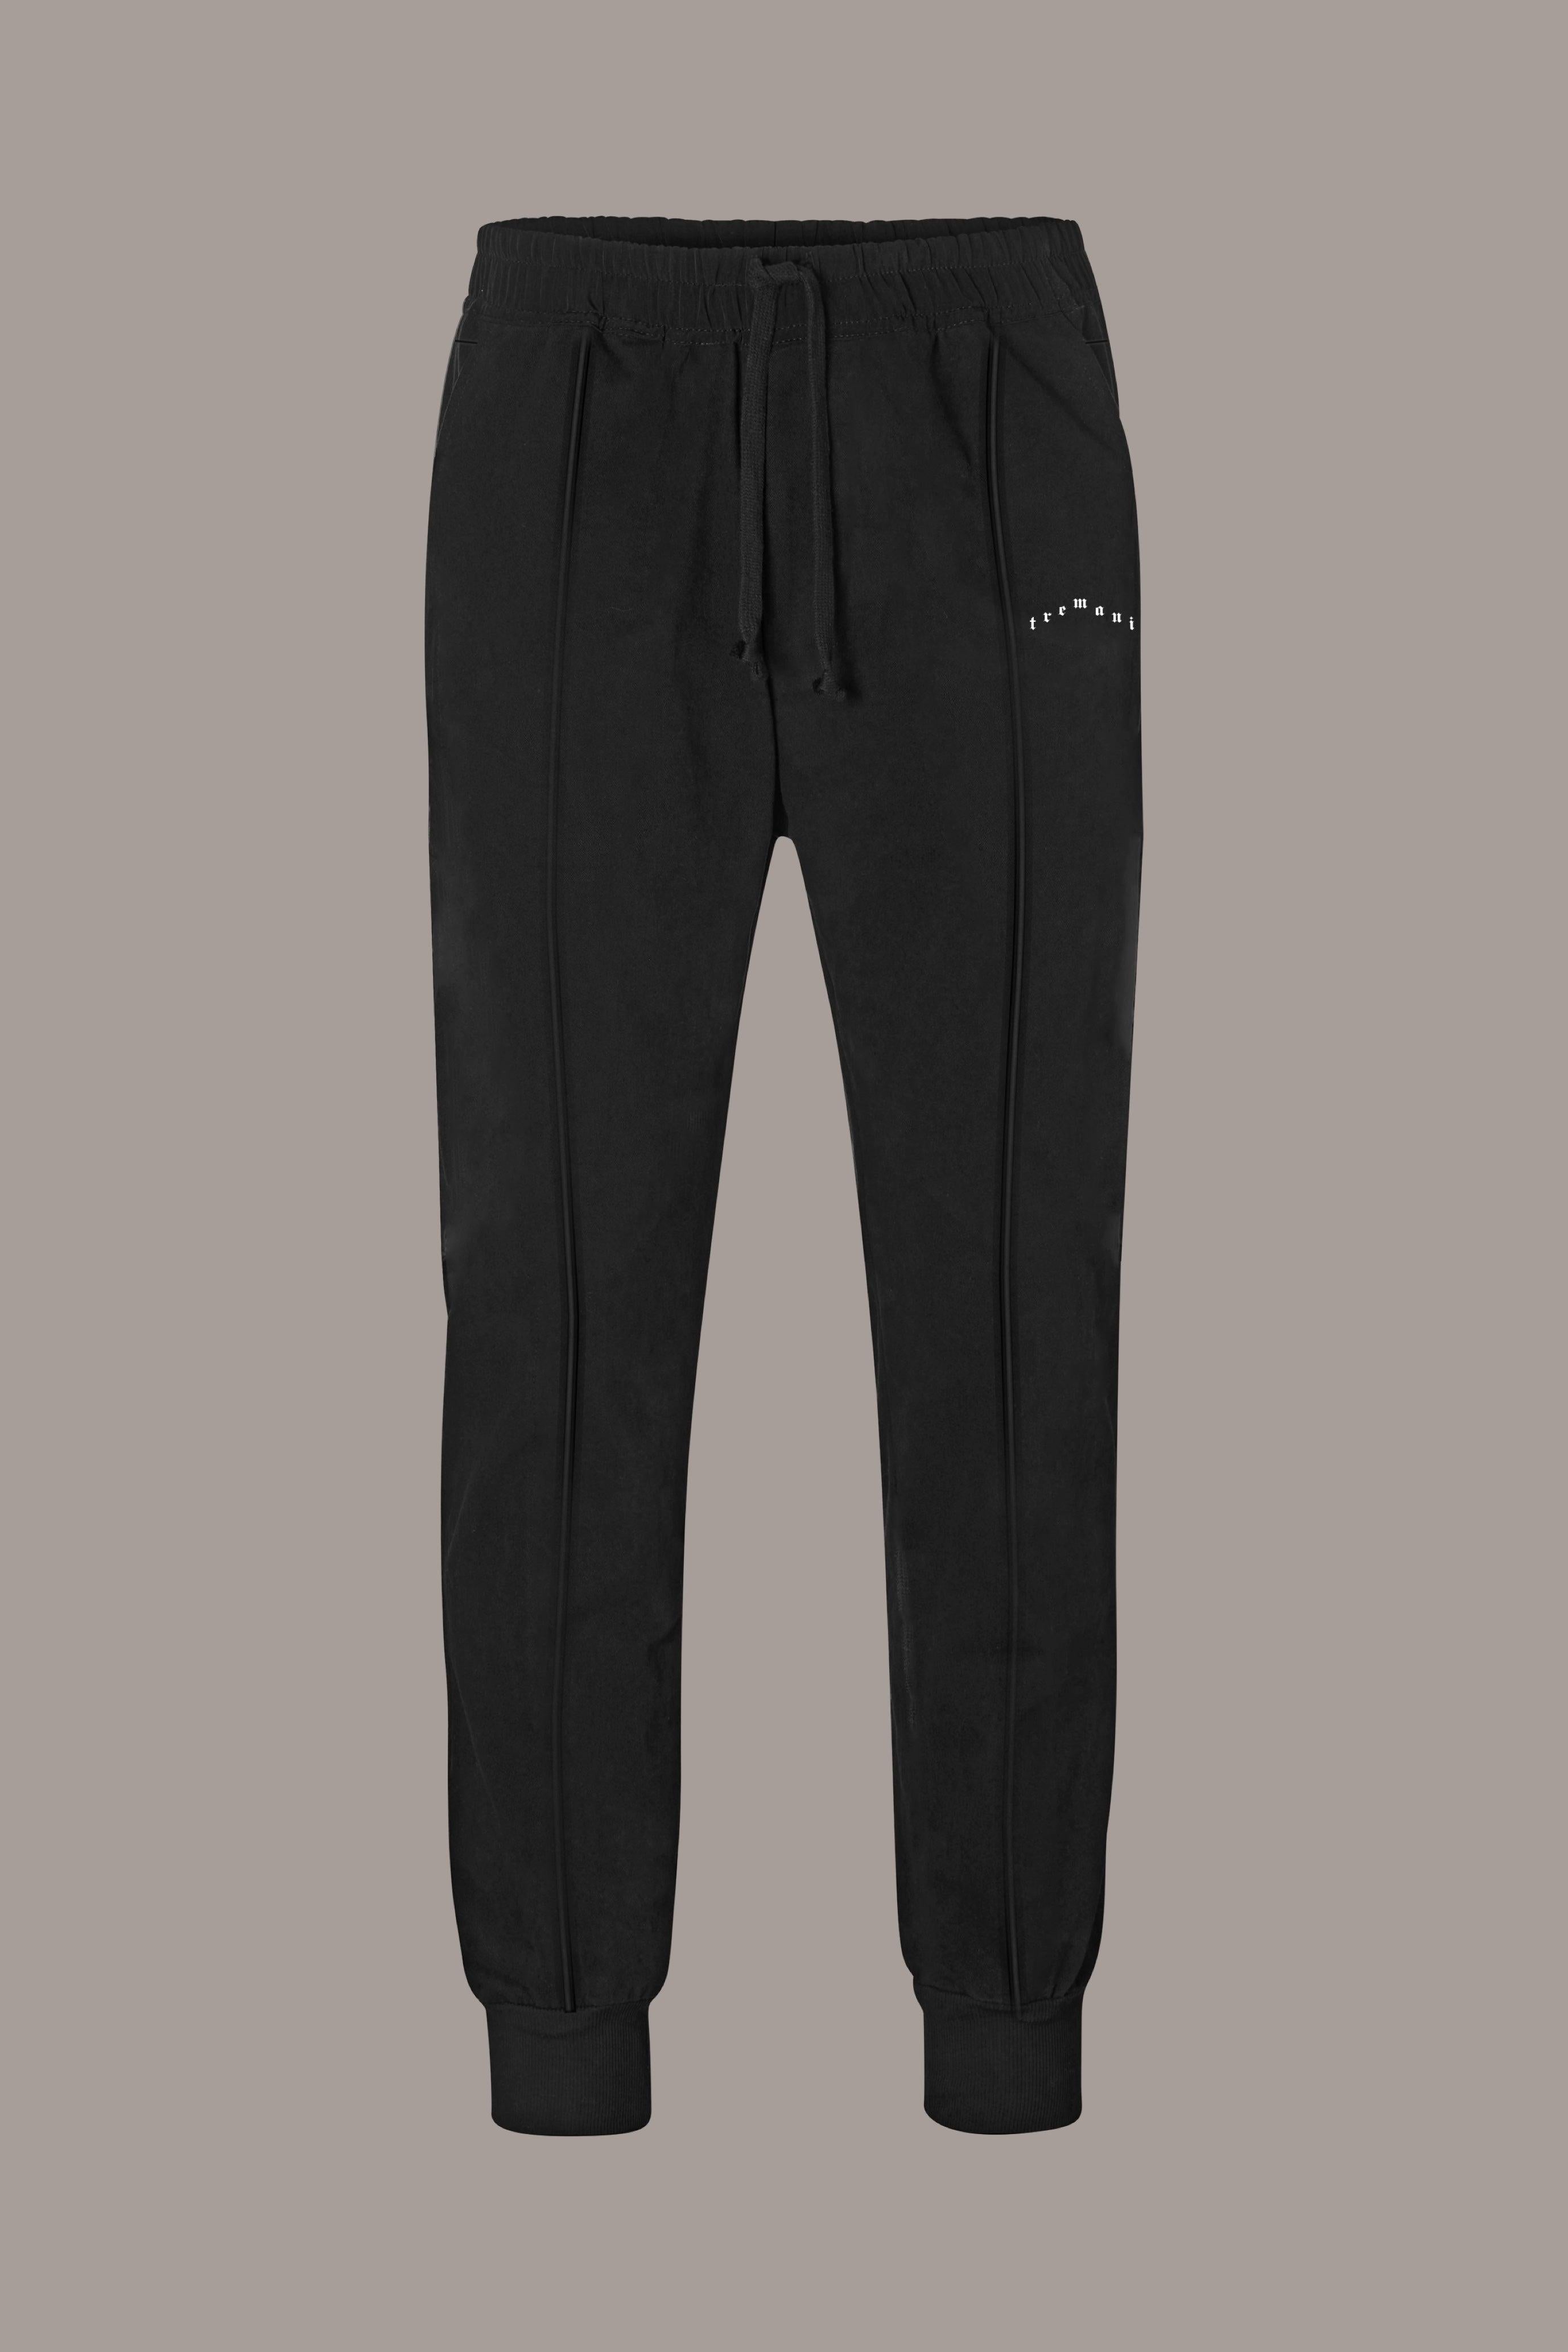 TWILL LOUNGE PANT - TWILL LOUNGE PANT - ROSE IN GOOD FAITH